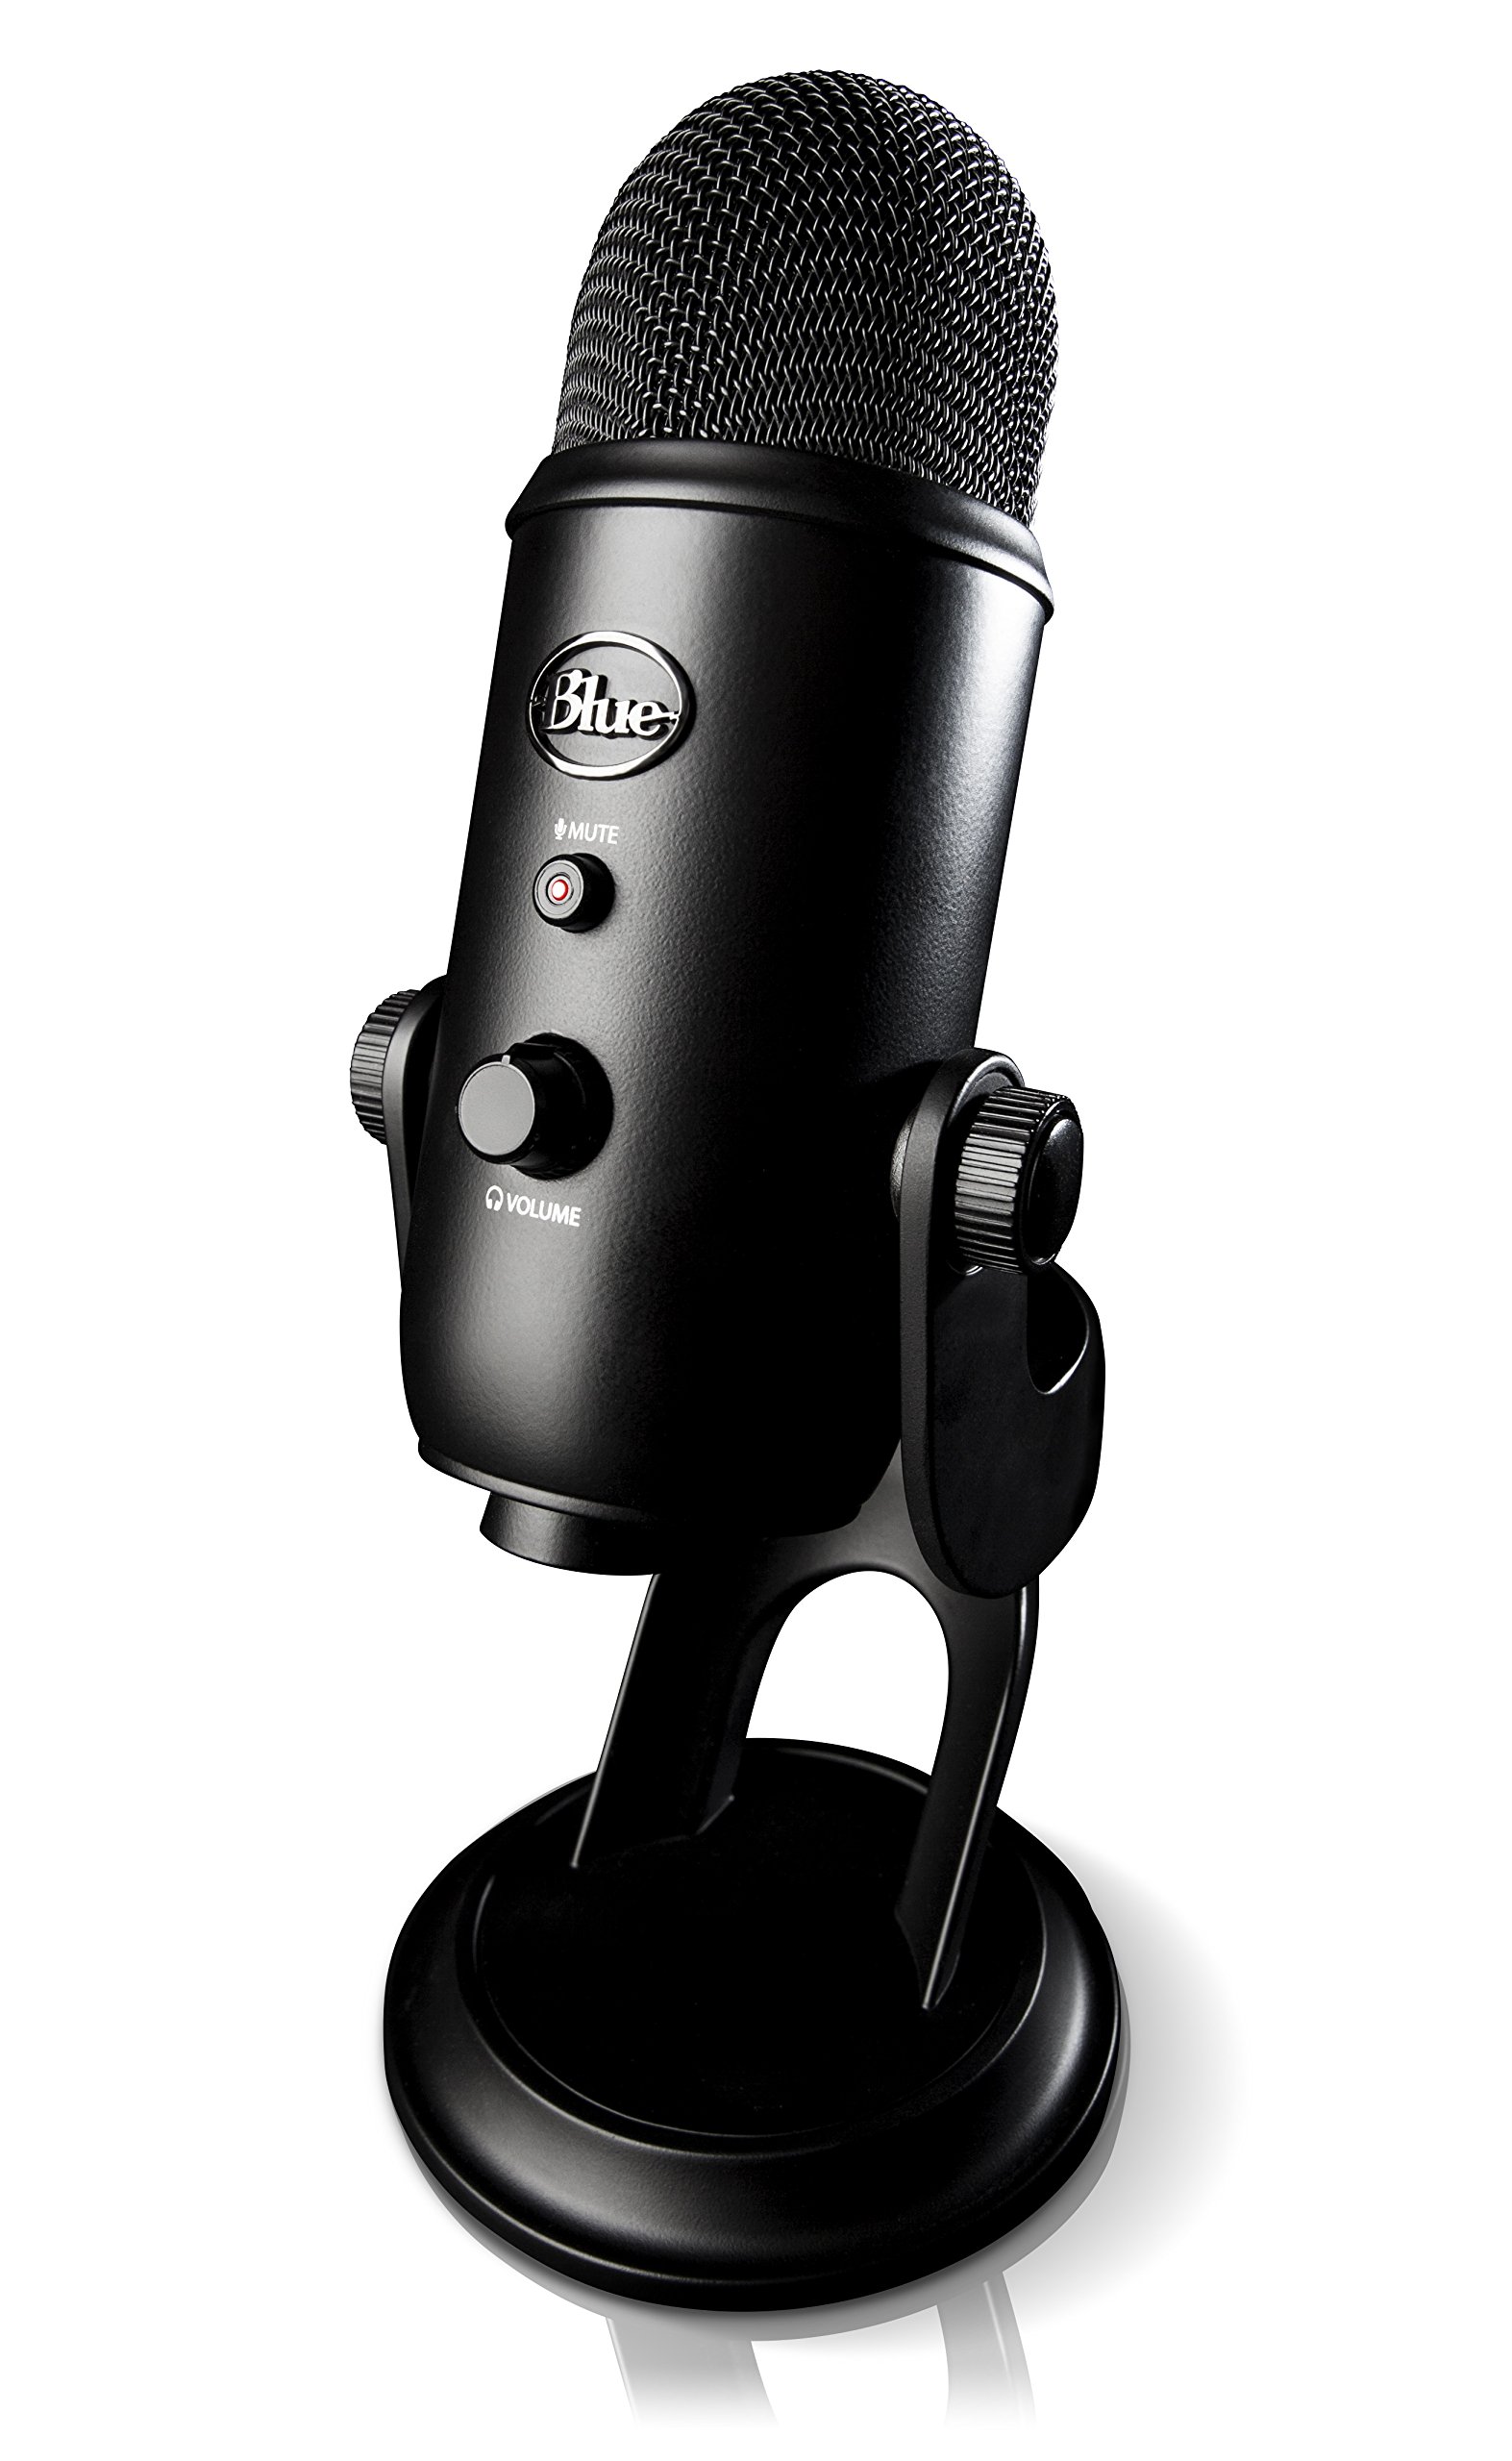 Blue Yeti microphone unboxed